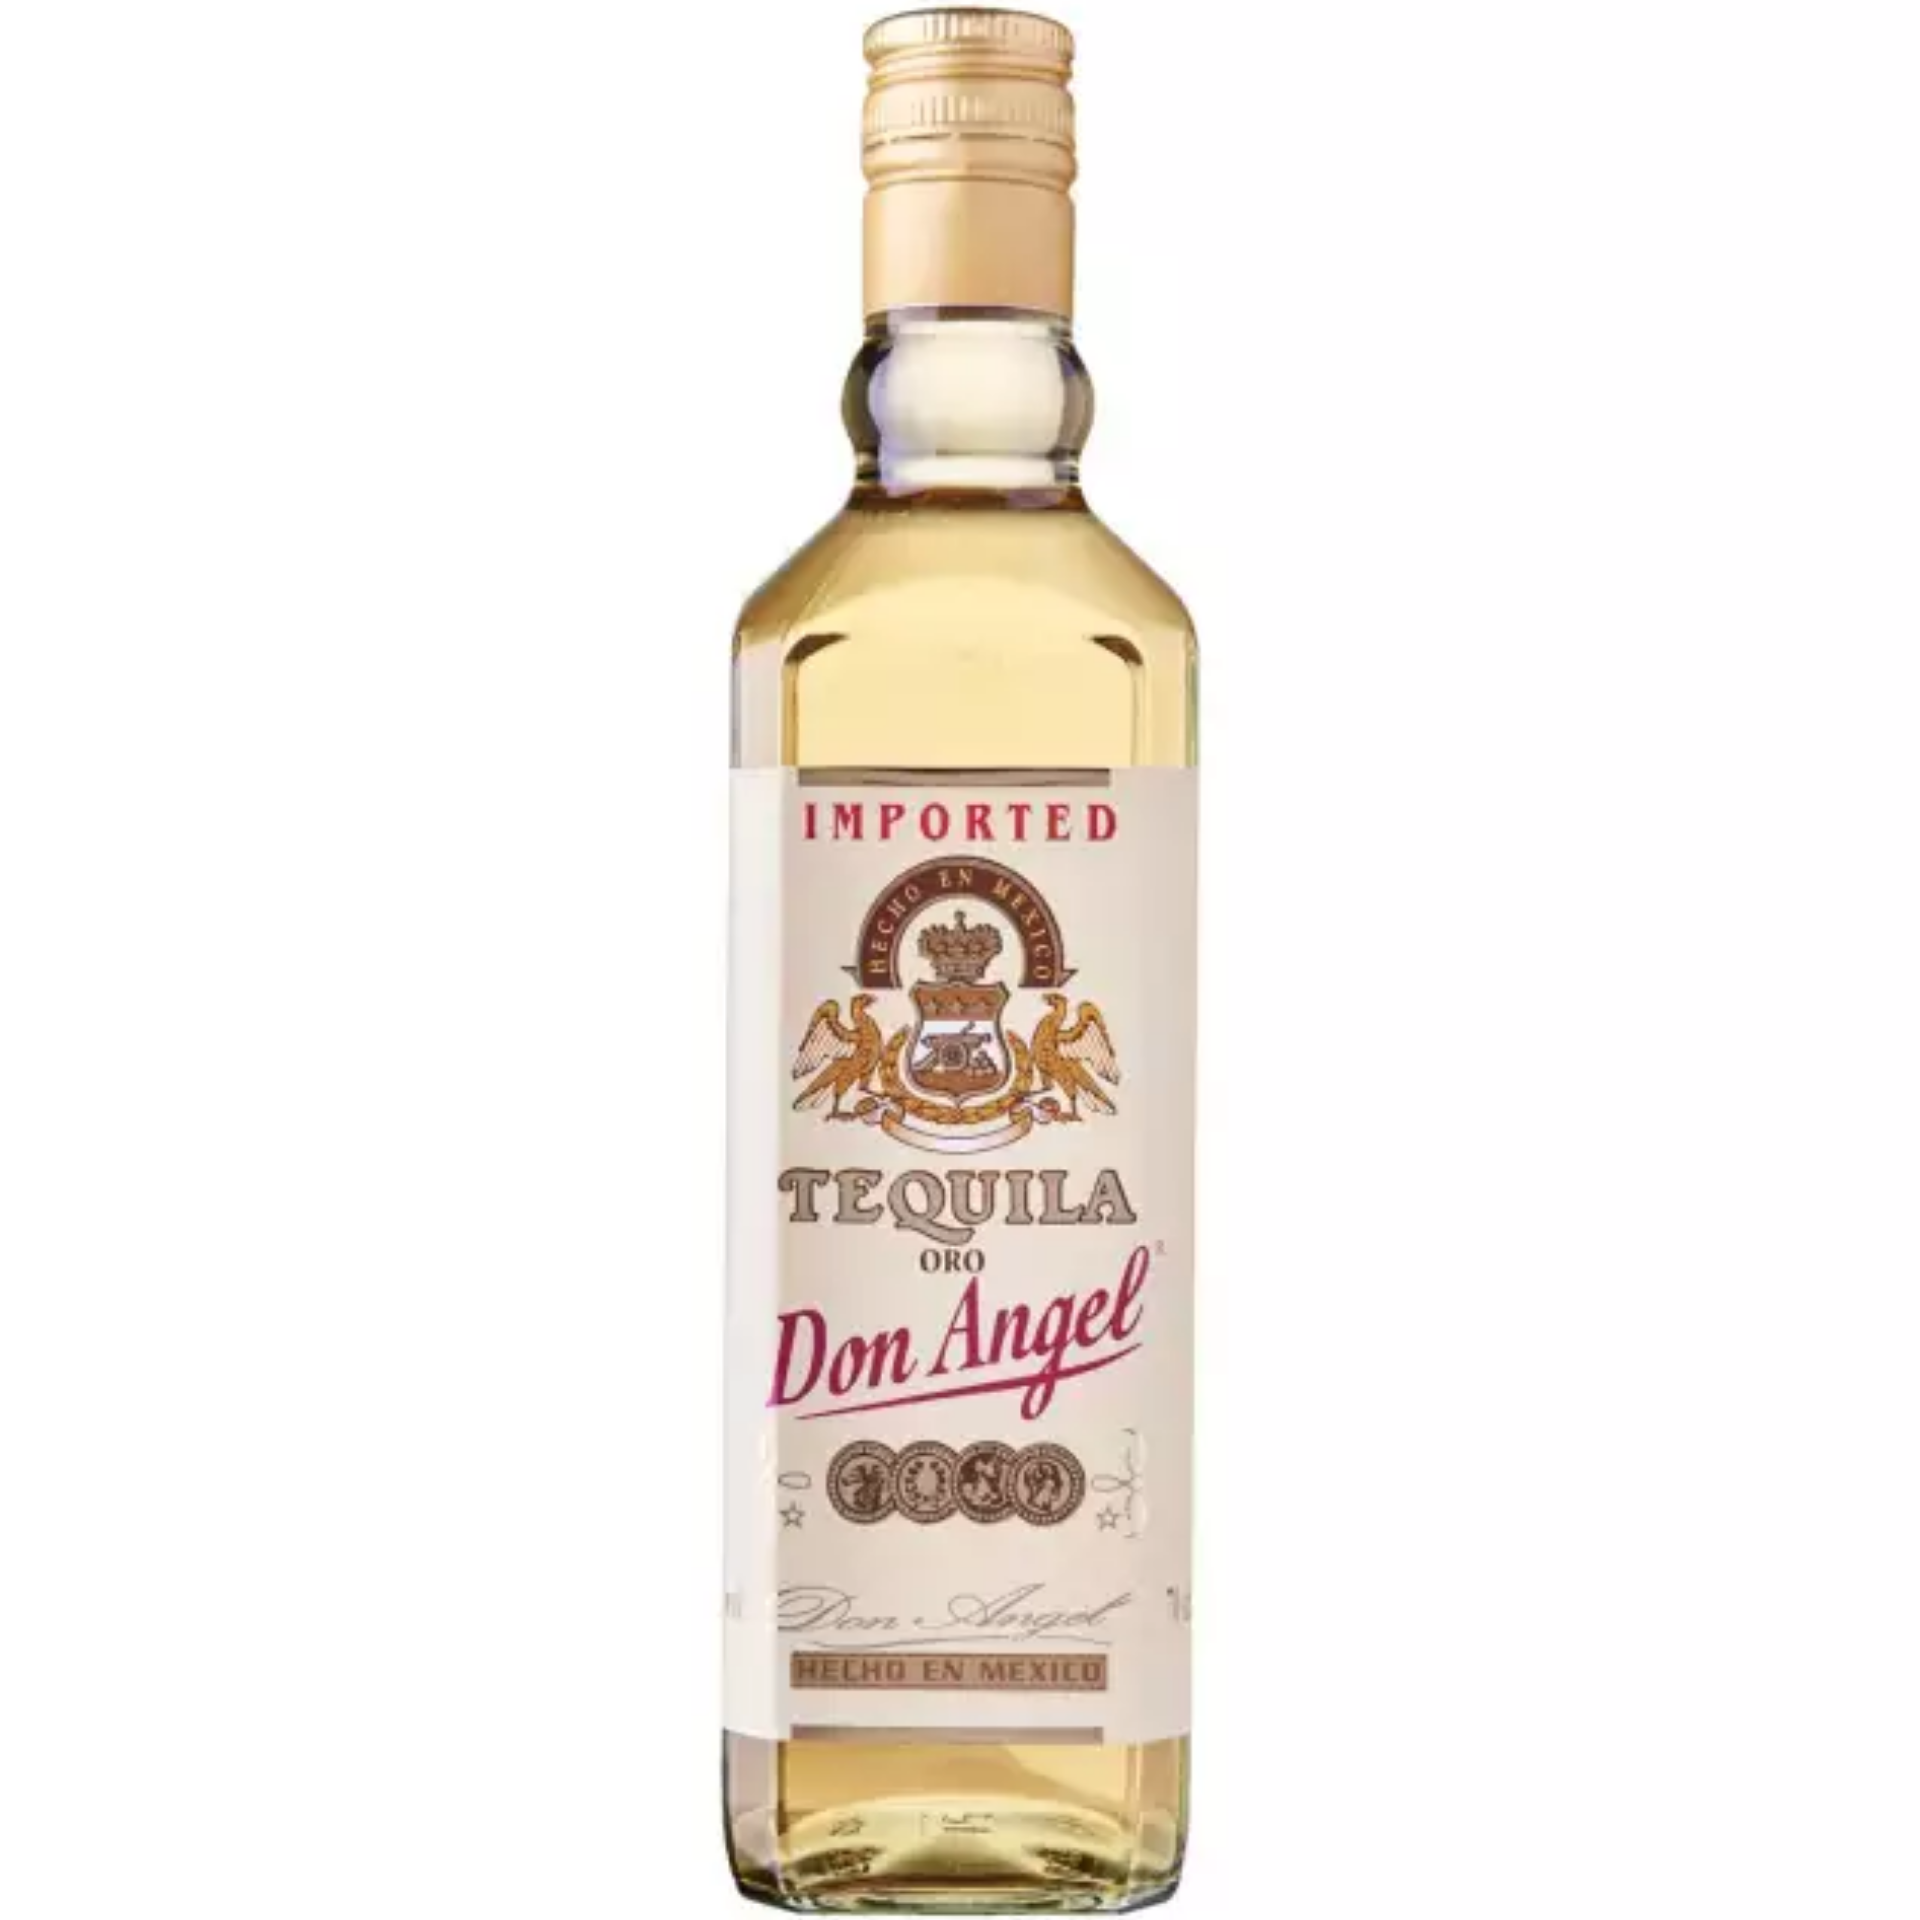 Don Angel Gold Tequila 700ml